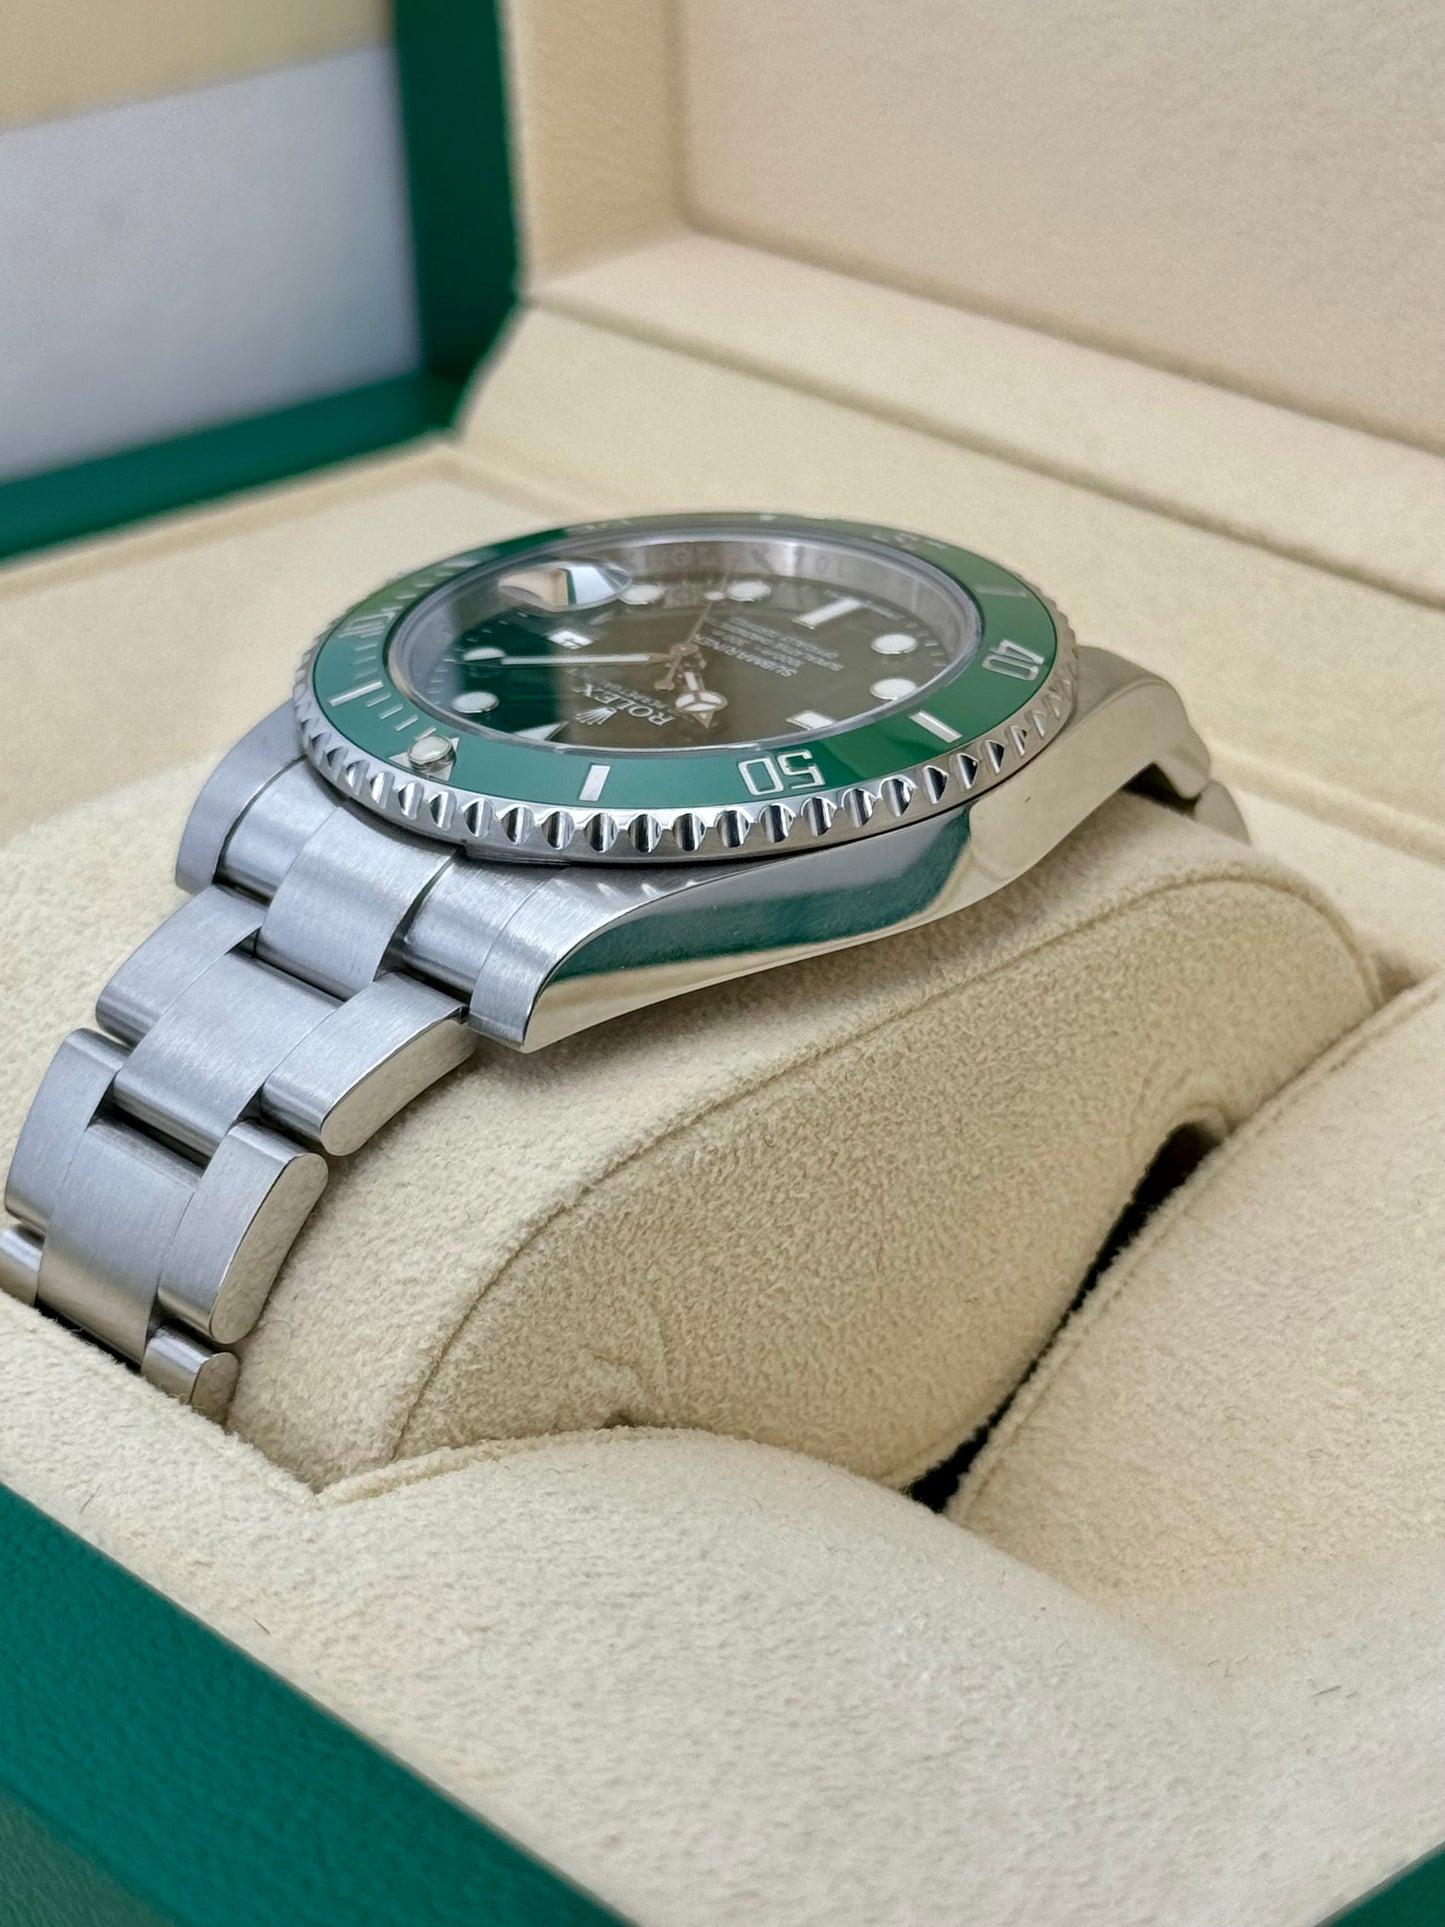 2015 Rolex Submariner Date "Hulk" 40mm 116610LV Green Dial - MyWatchLLC